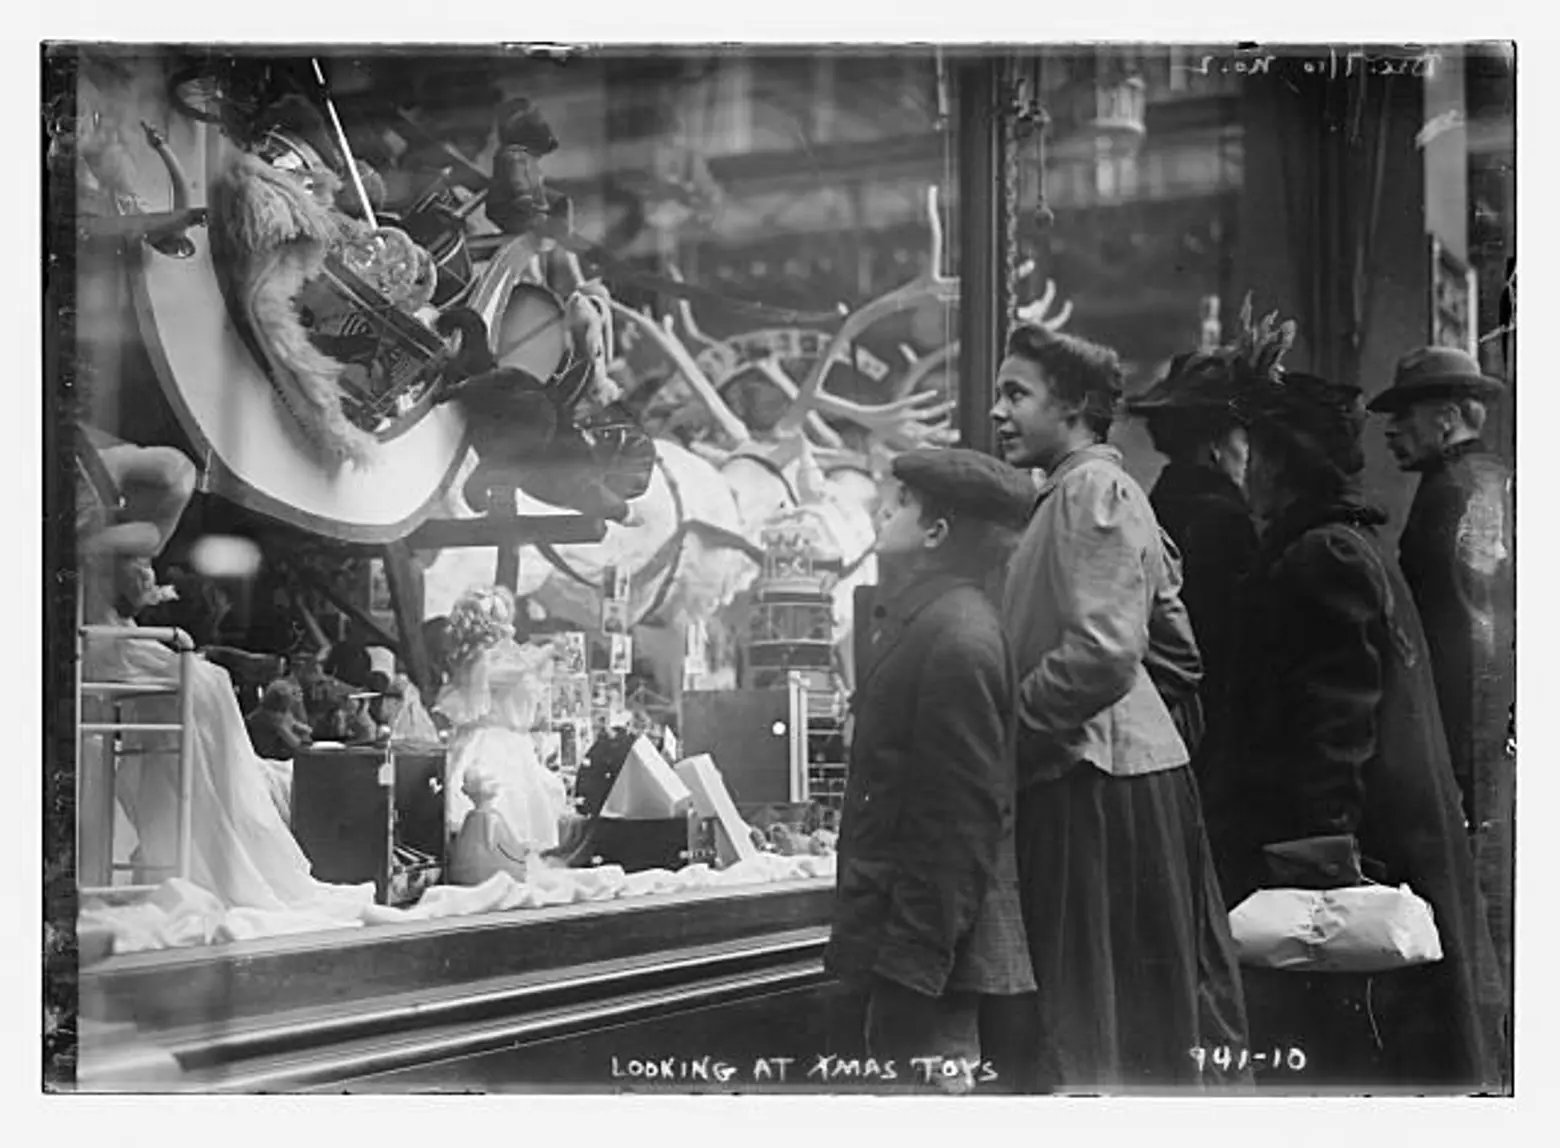 Christmas and Holiday Windows at New York Department Stores